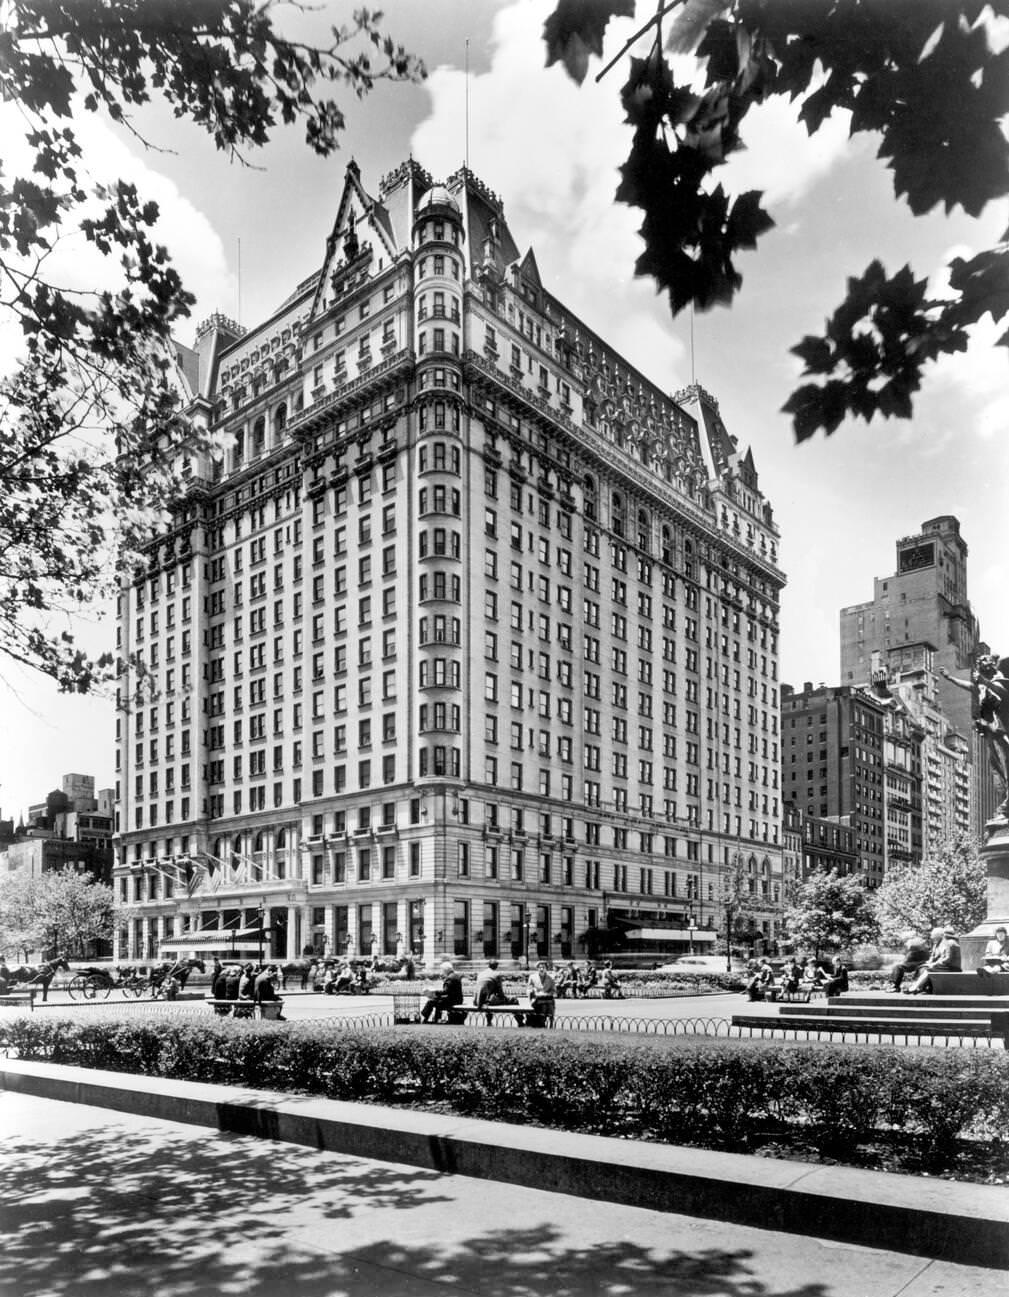 The Plaza Hotel, Central Park South (59th Street) and Fifth Avenue, New York City, 1960